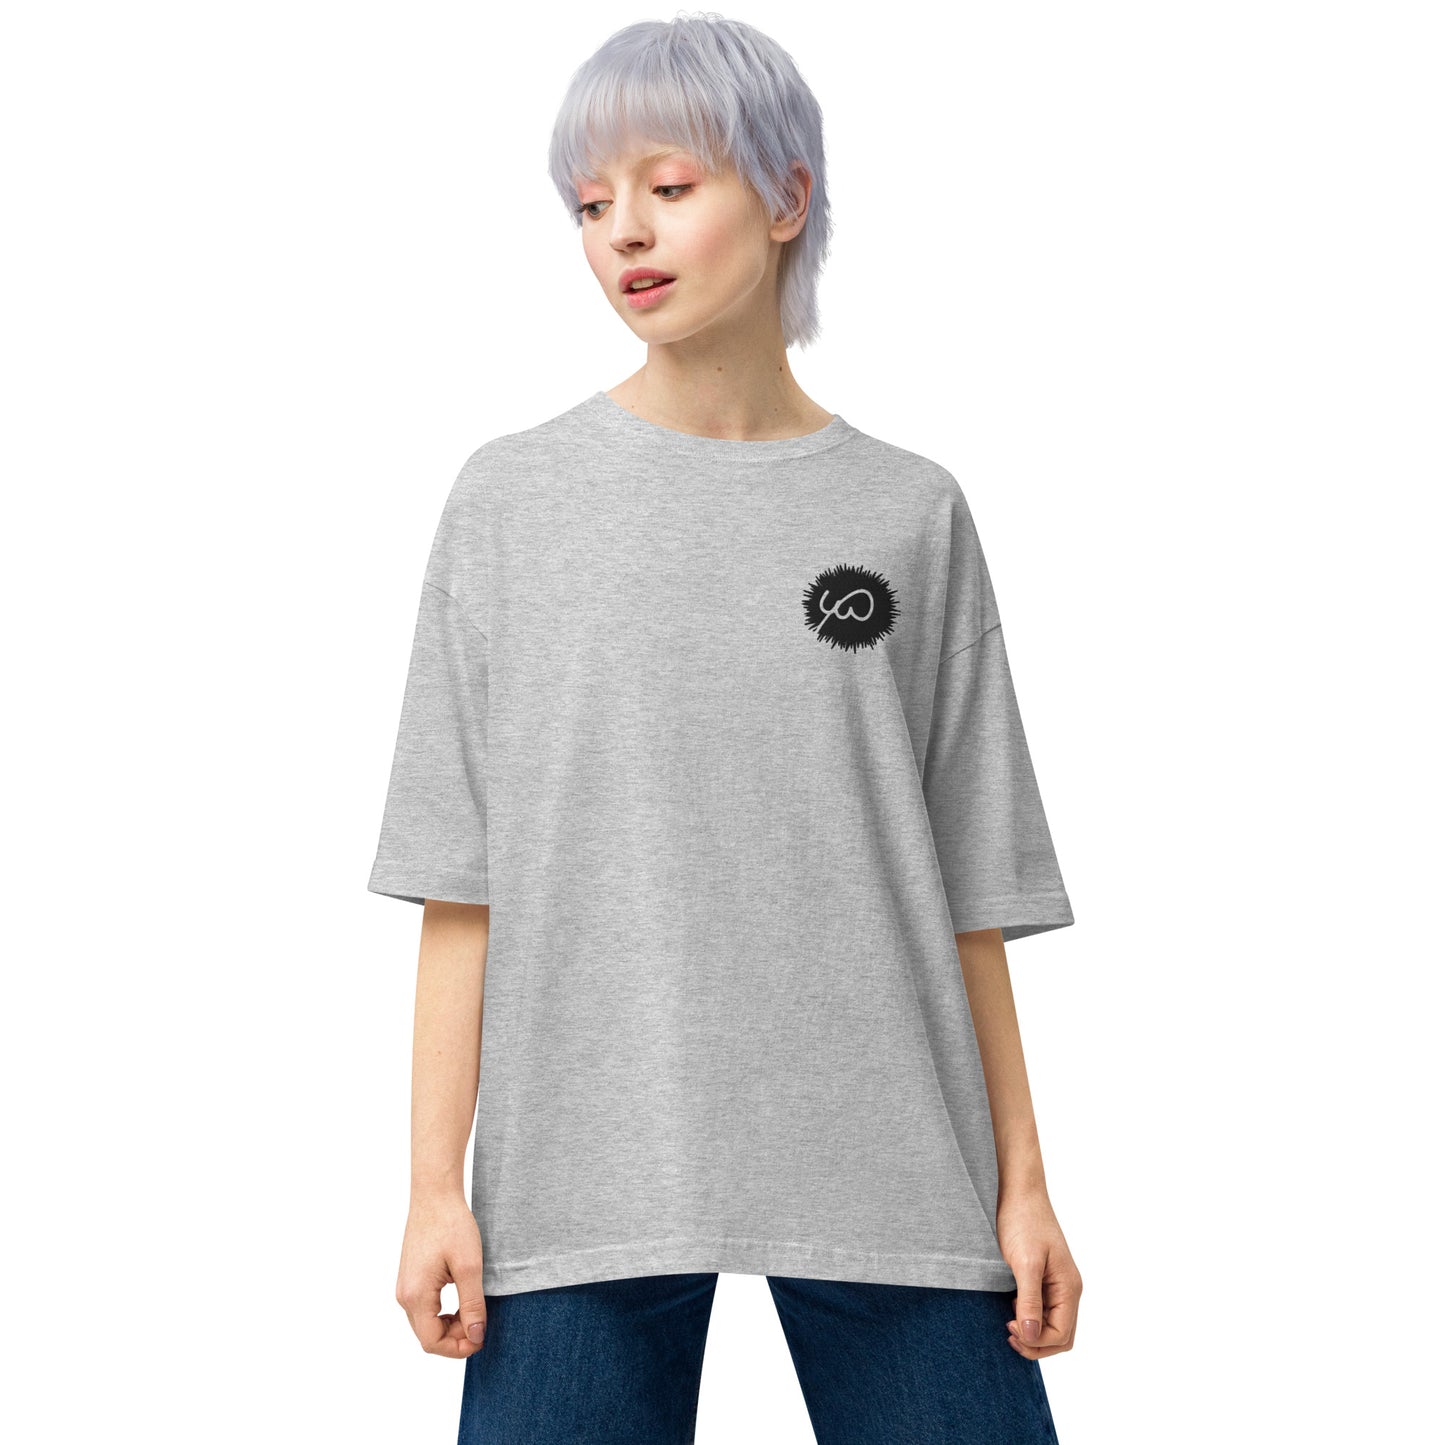 Light Gray High Quality Oversize Drop ShoulderTee - Front Design with an Black Embroidery of Uniwari Logo